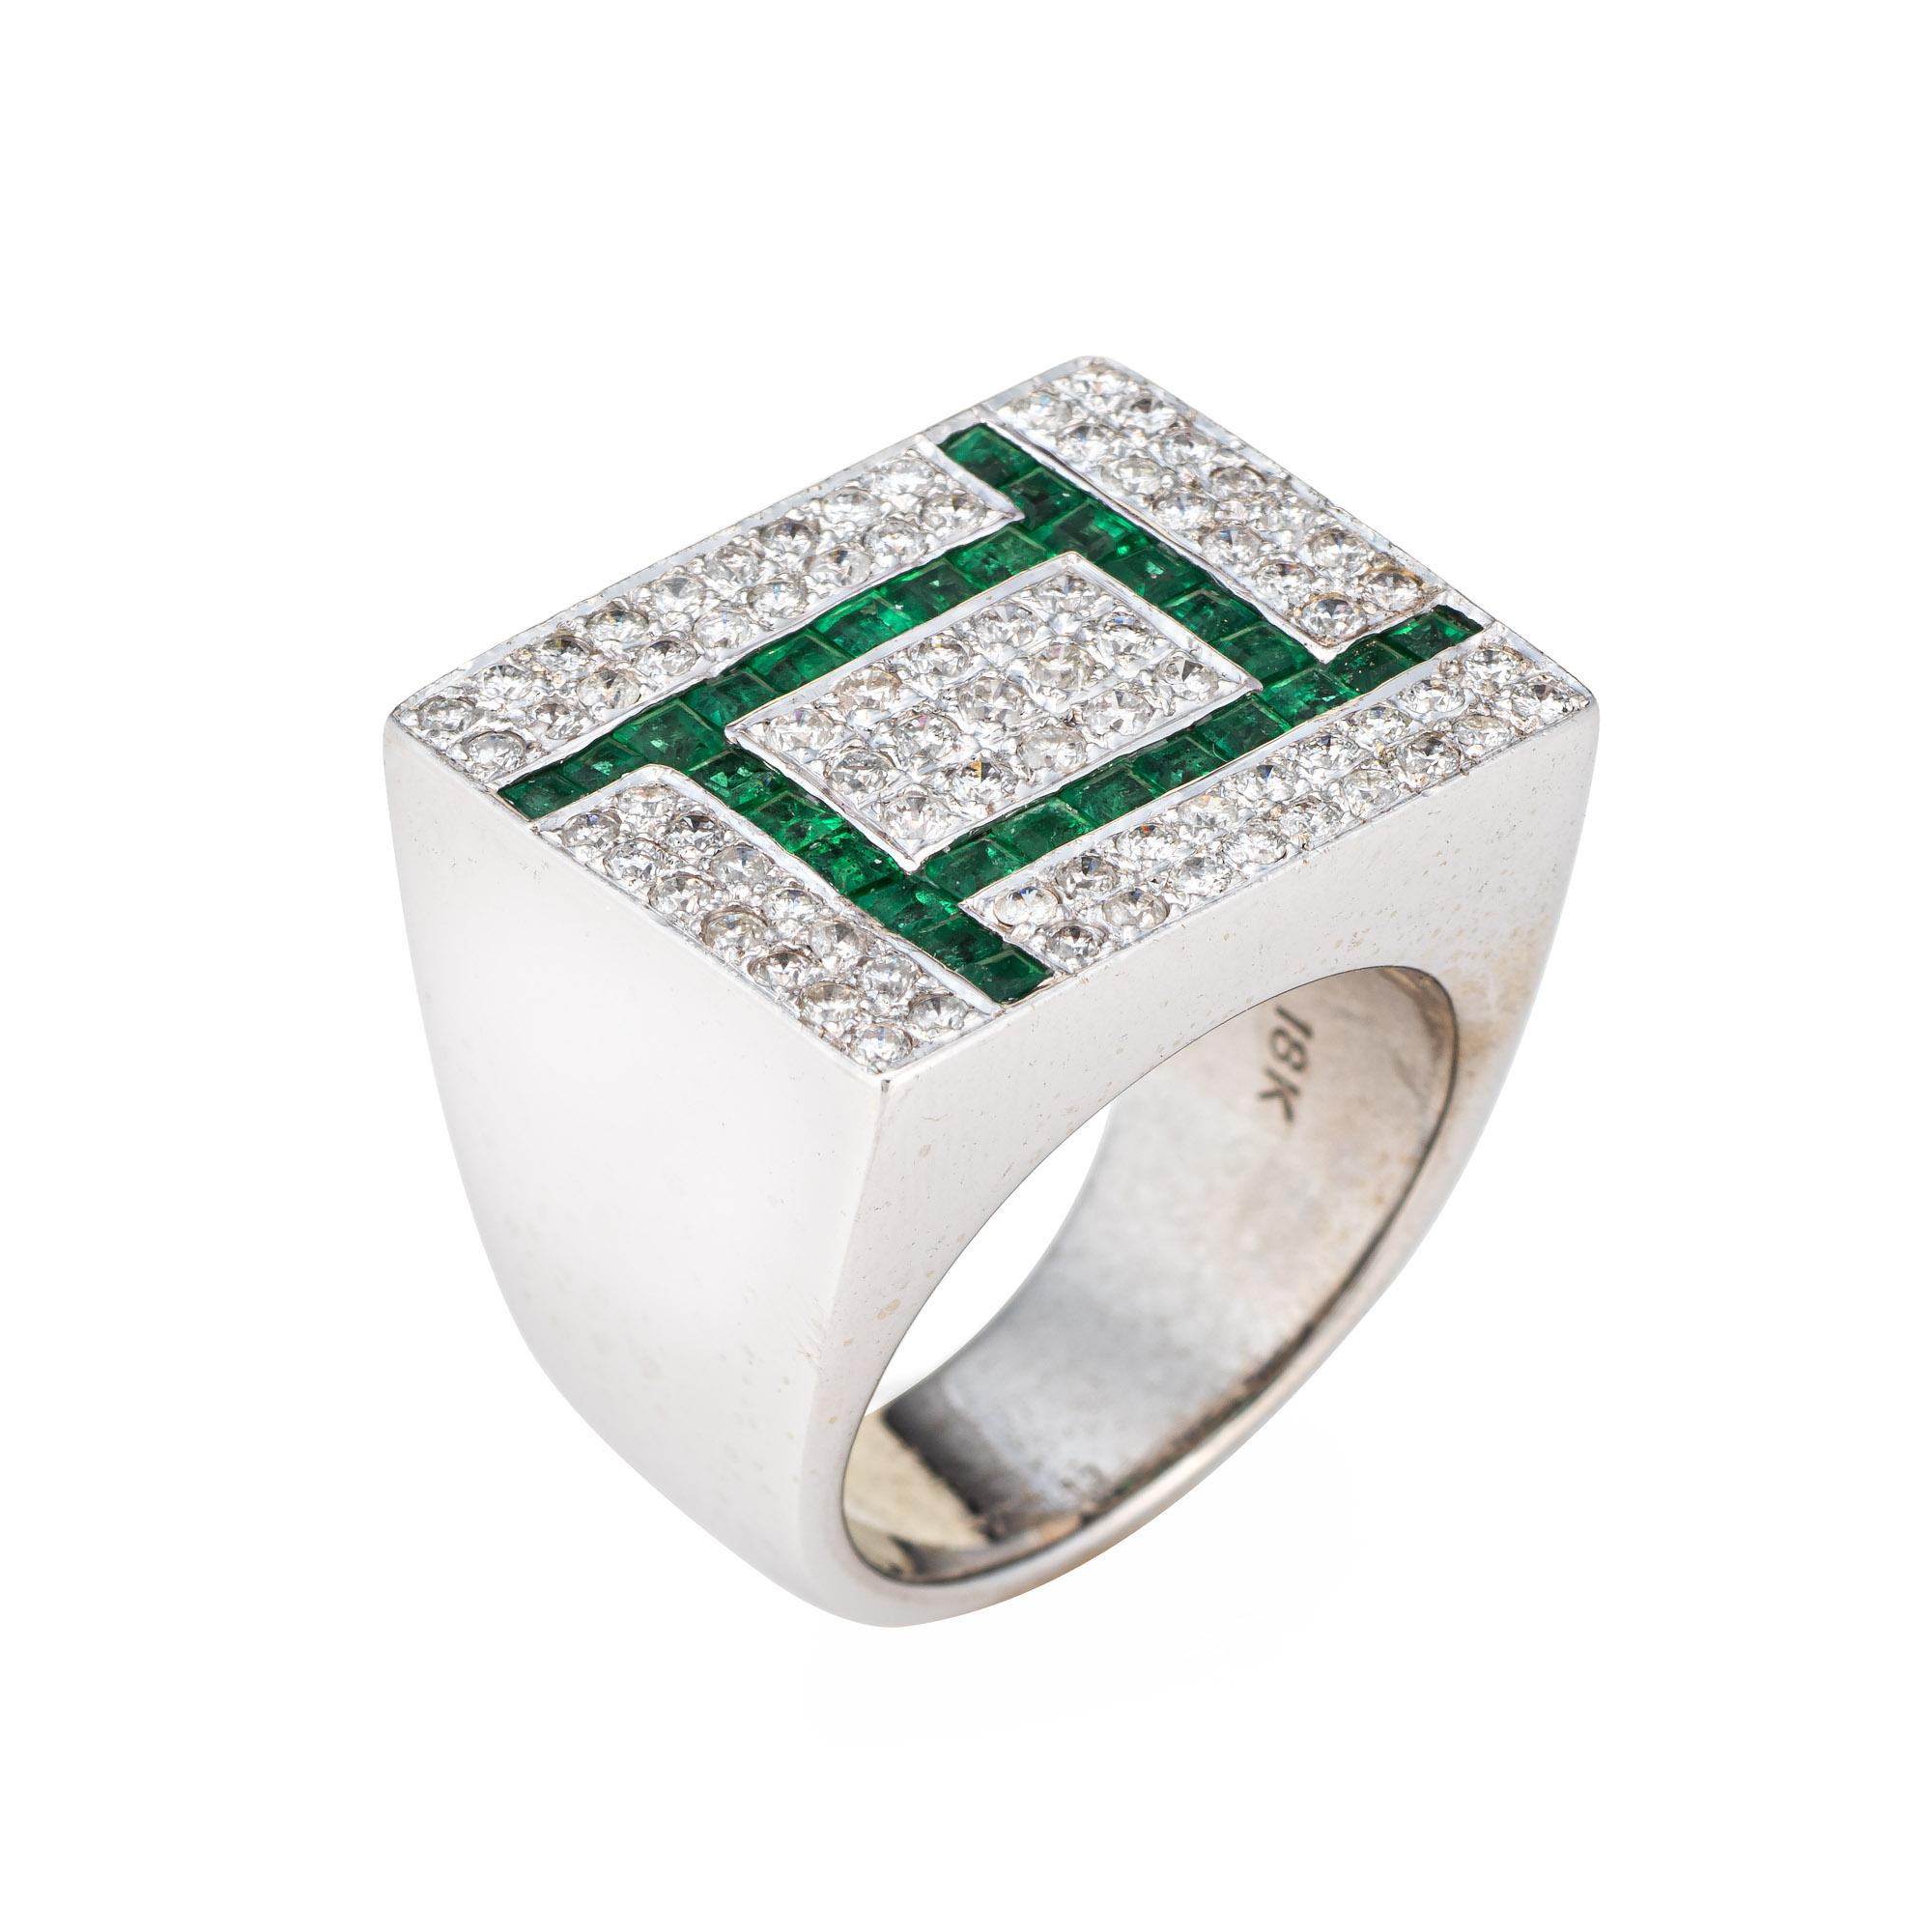 Stylish vintage diamond & emerald ring (circa 1980s) crafted in 18 karat white gold. 

79 round brilliant cut diamonds total an estimated 0.79 carats (estimated at I-J color and SI1-I2 clarity). Emeralds measure approx. 1.5mm each. 

Set in a